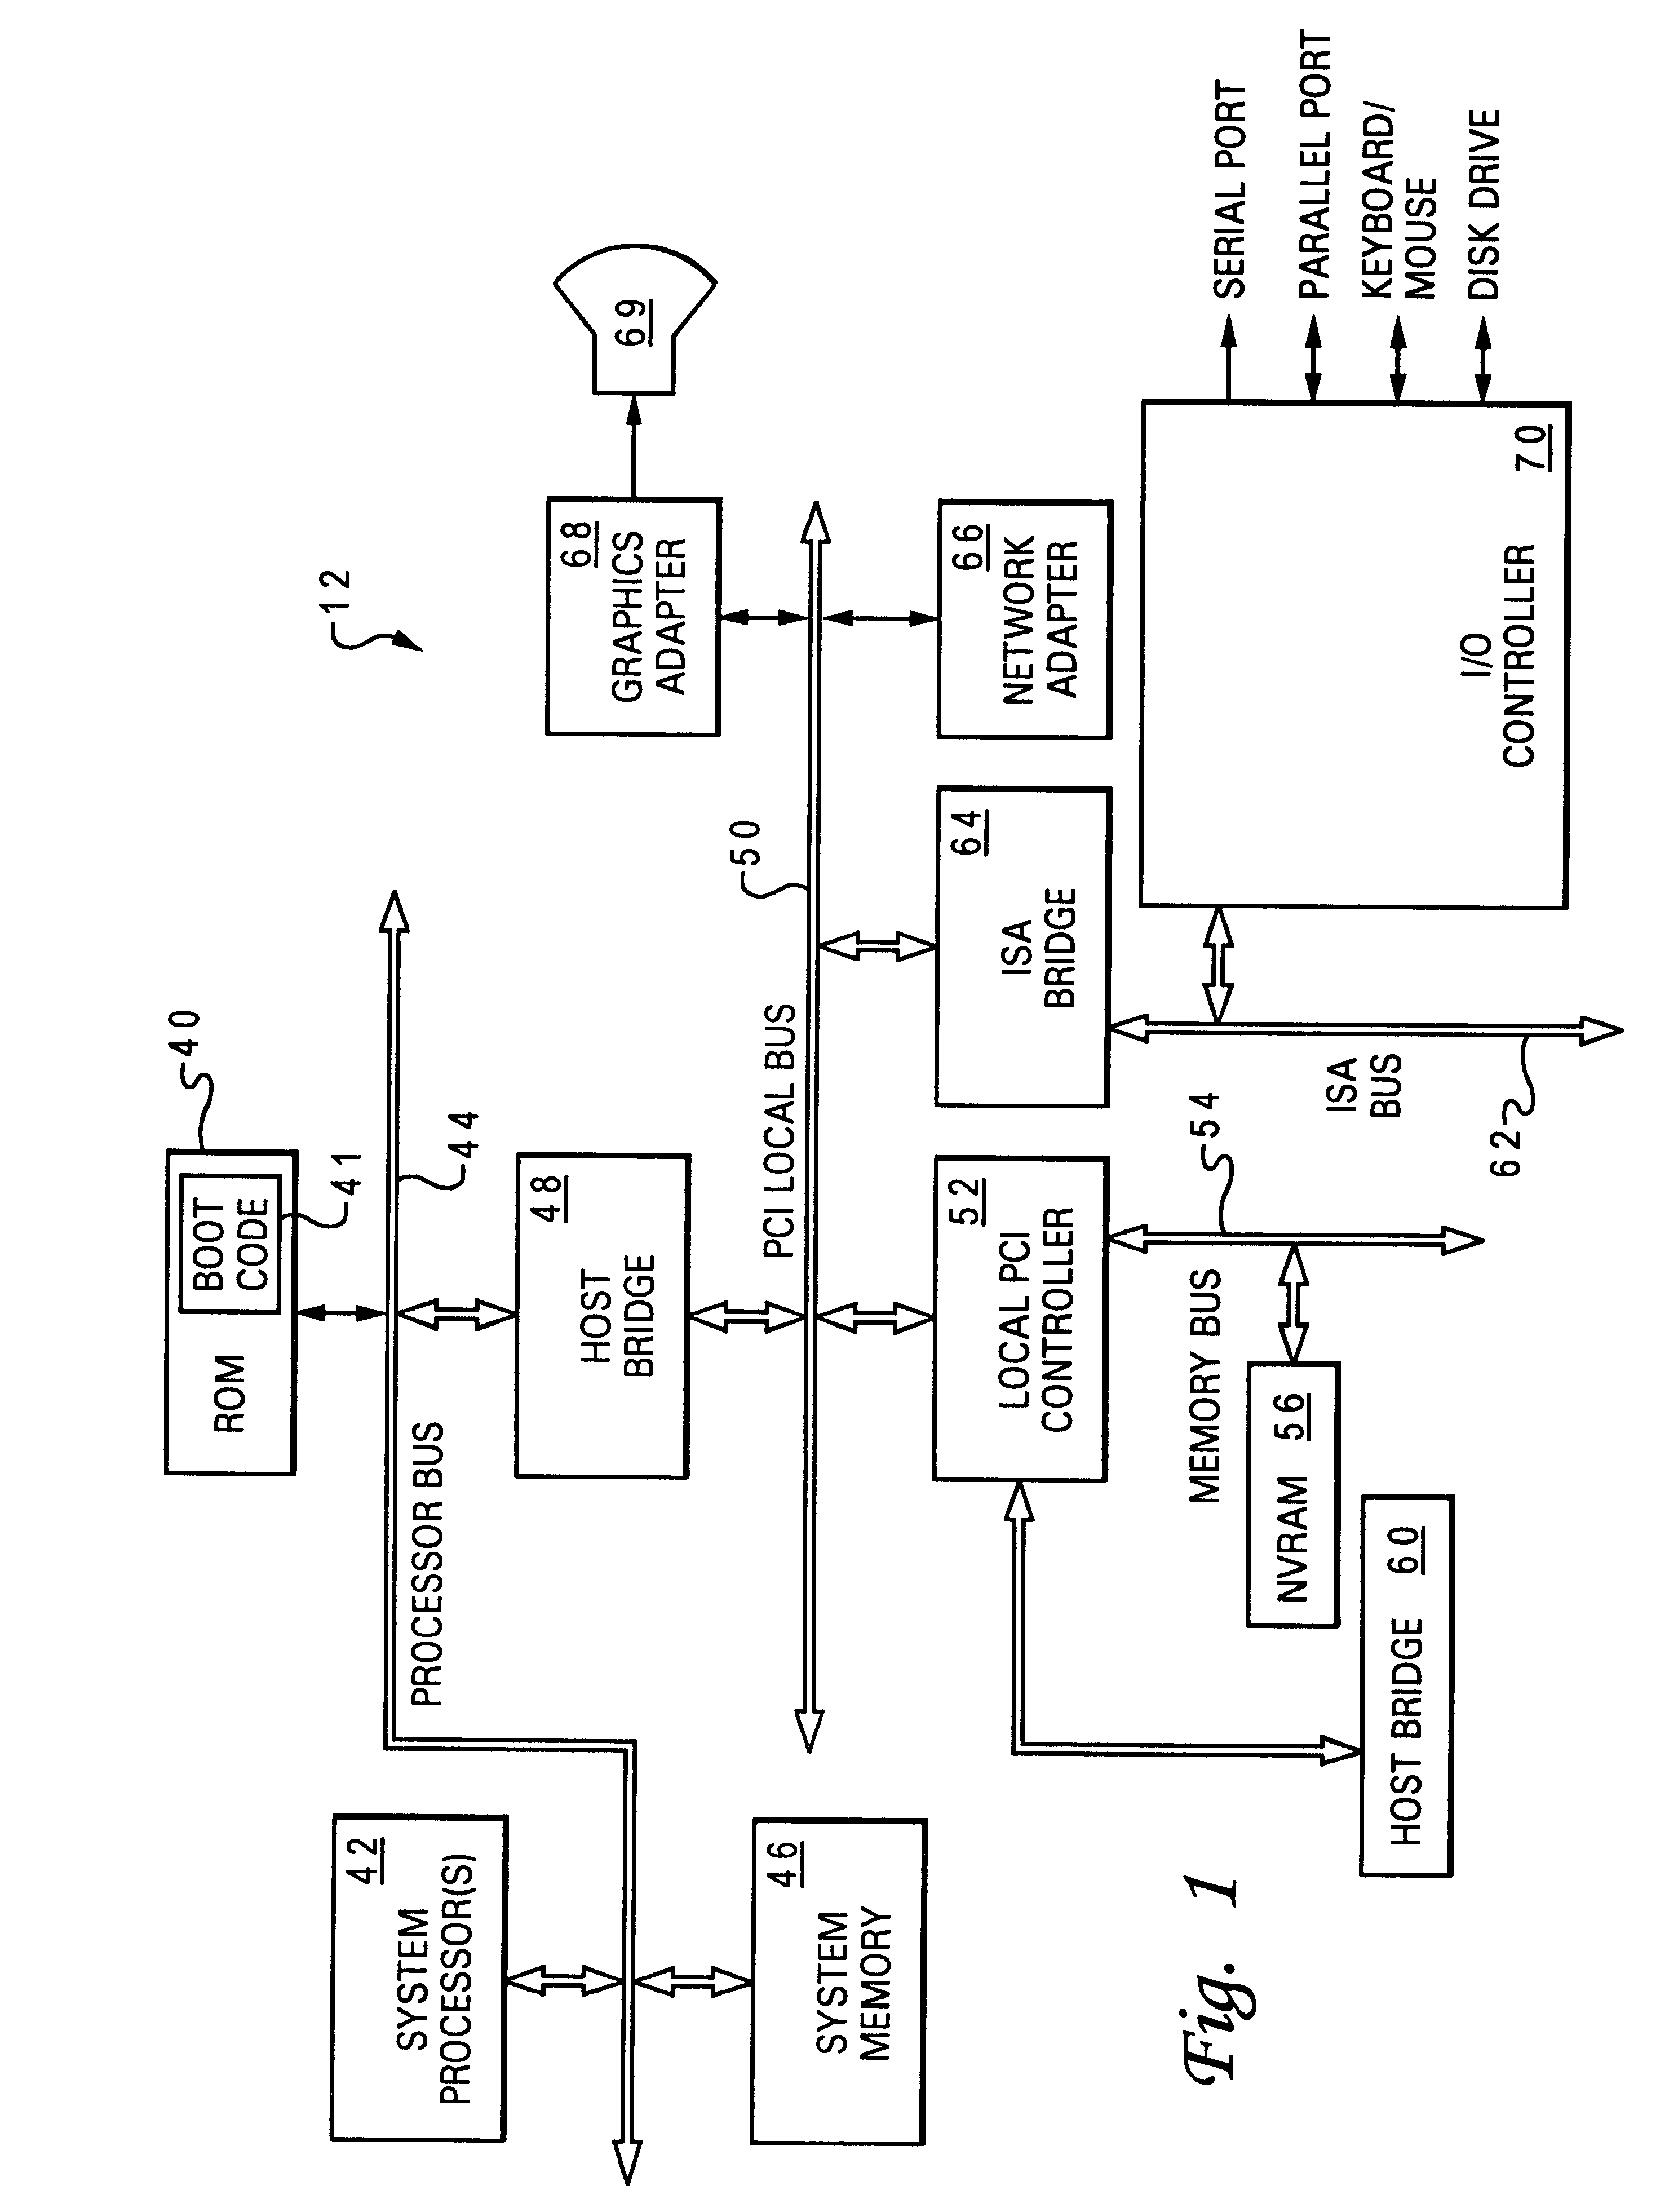 Discrete, background determination of the adequacy of security features of a computer system